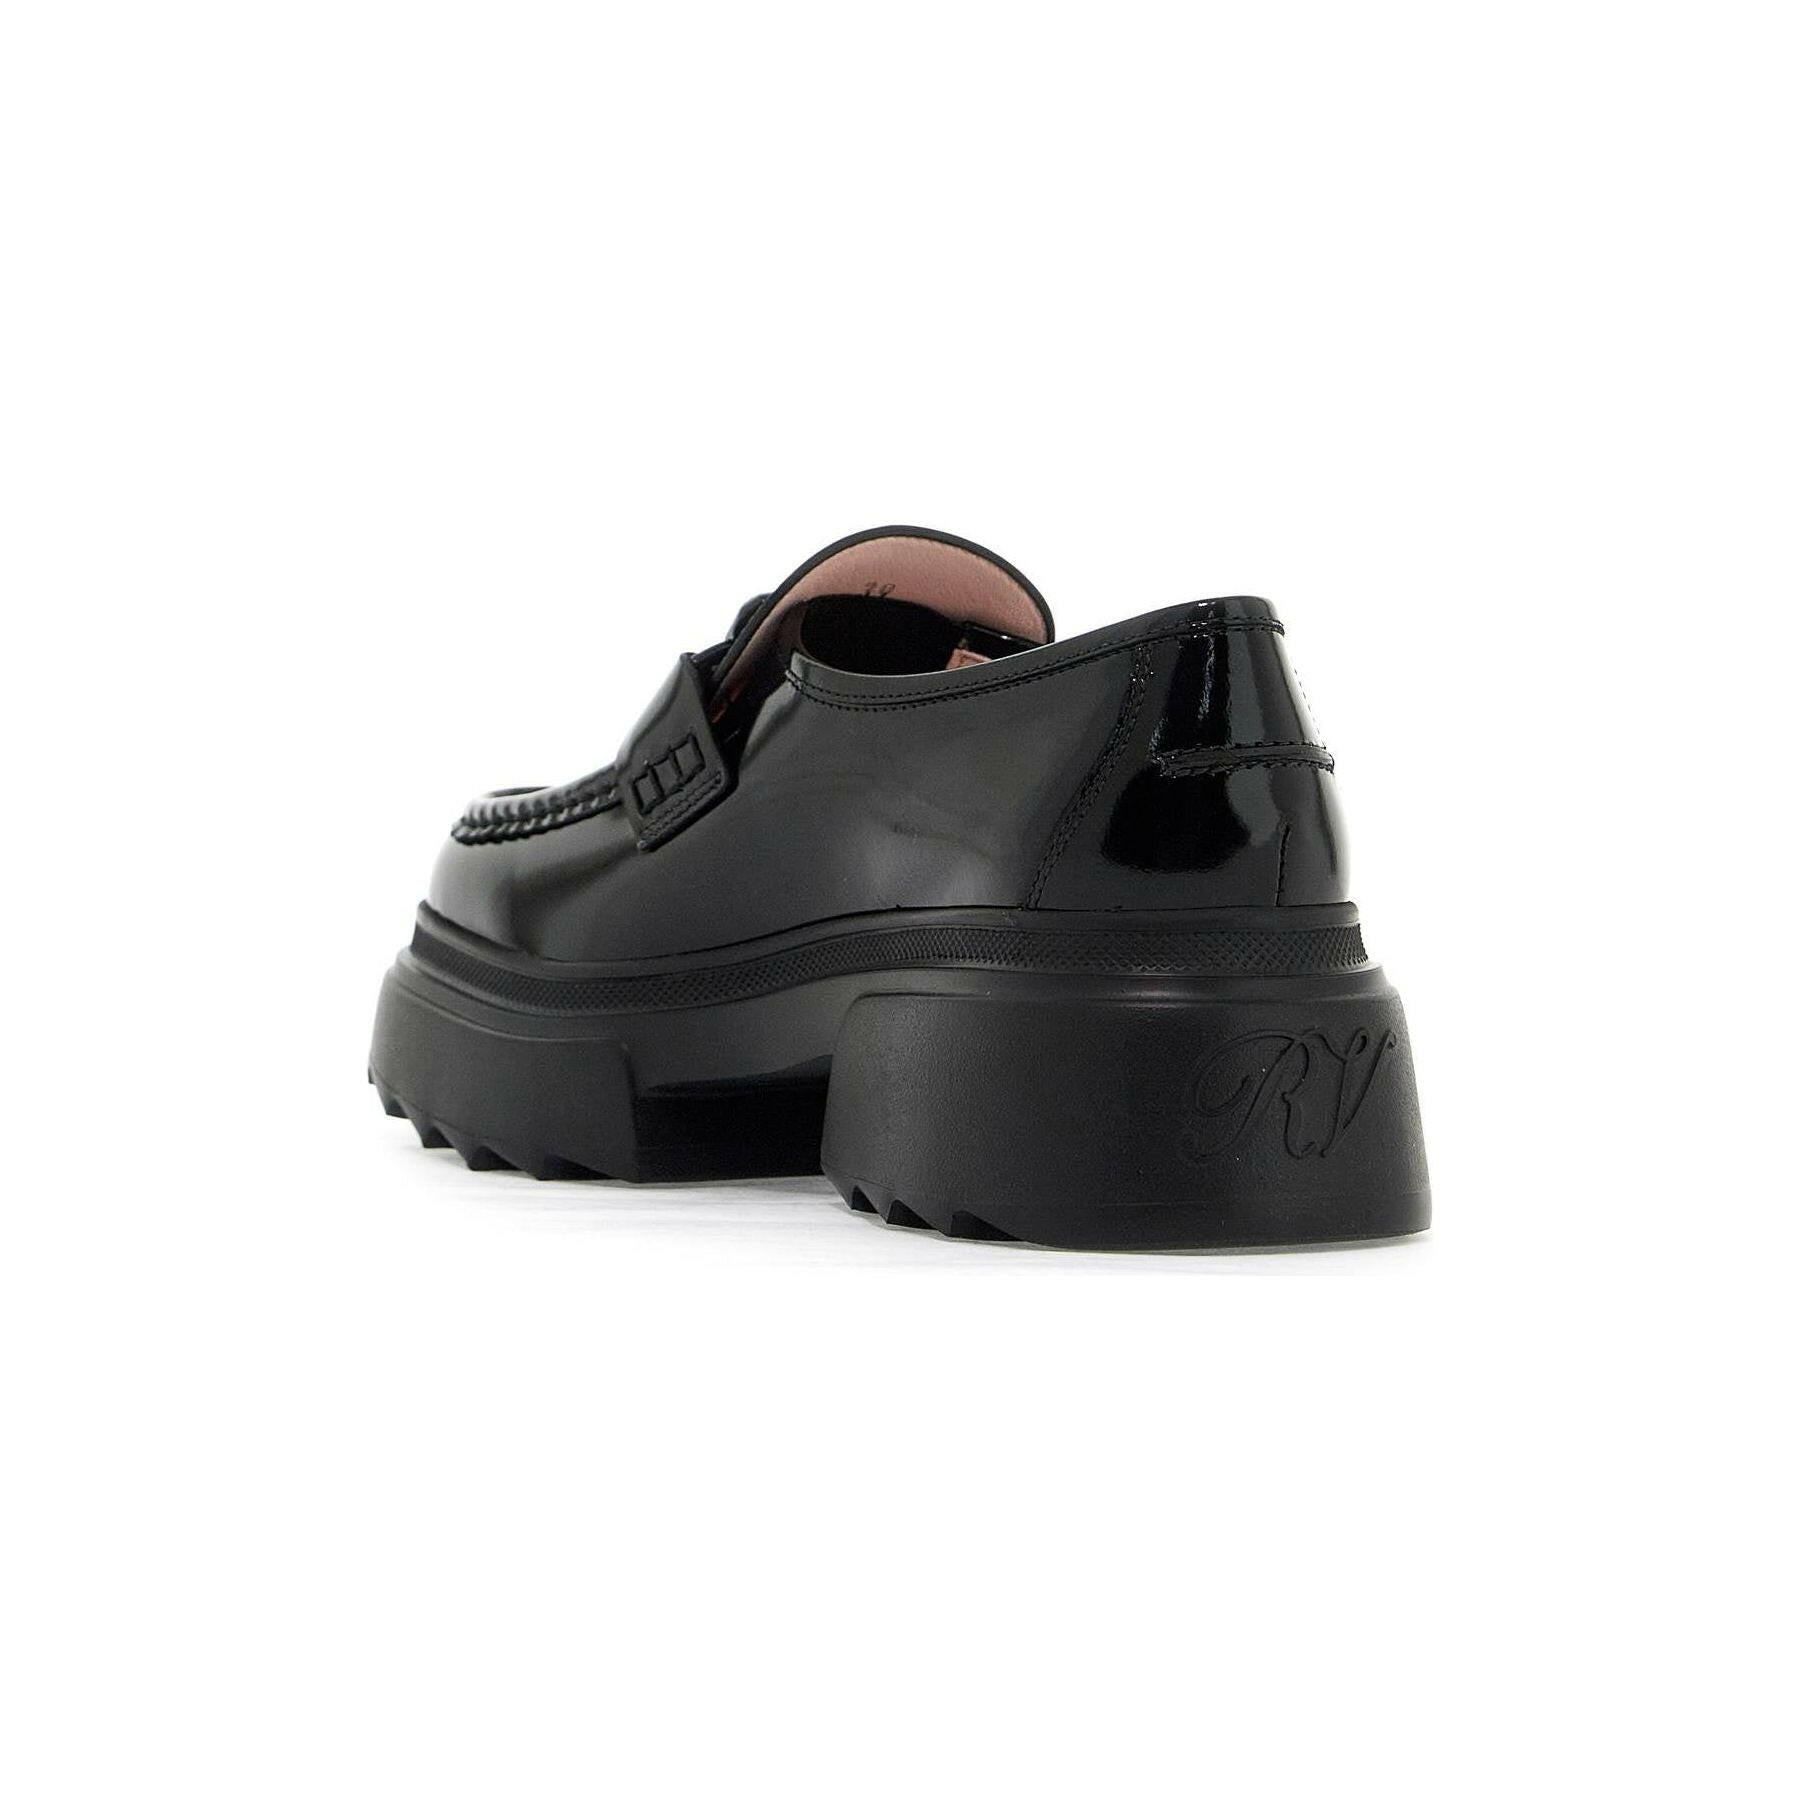 Patent Leather Wallaviv Strass Buckle Loafers.